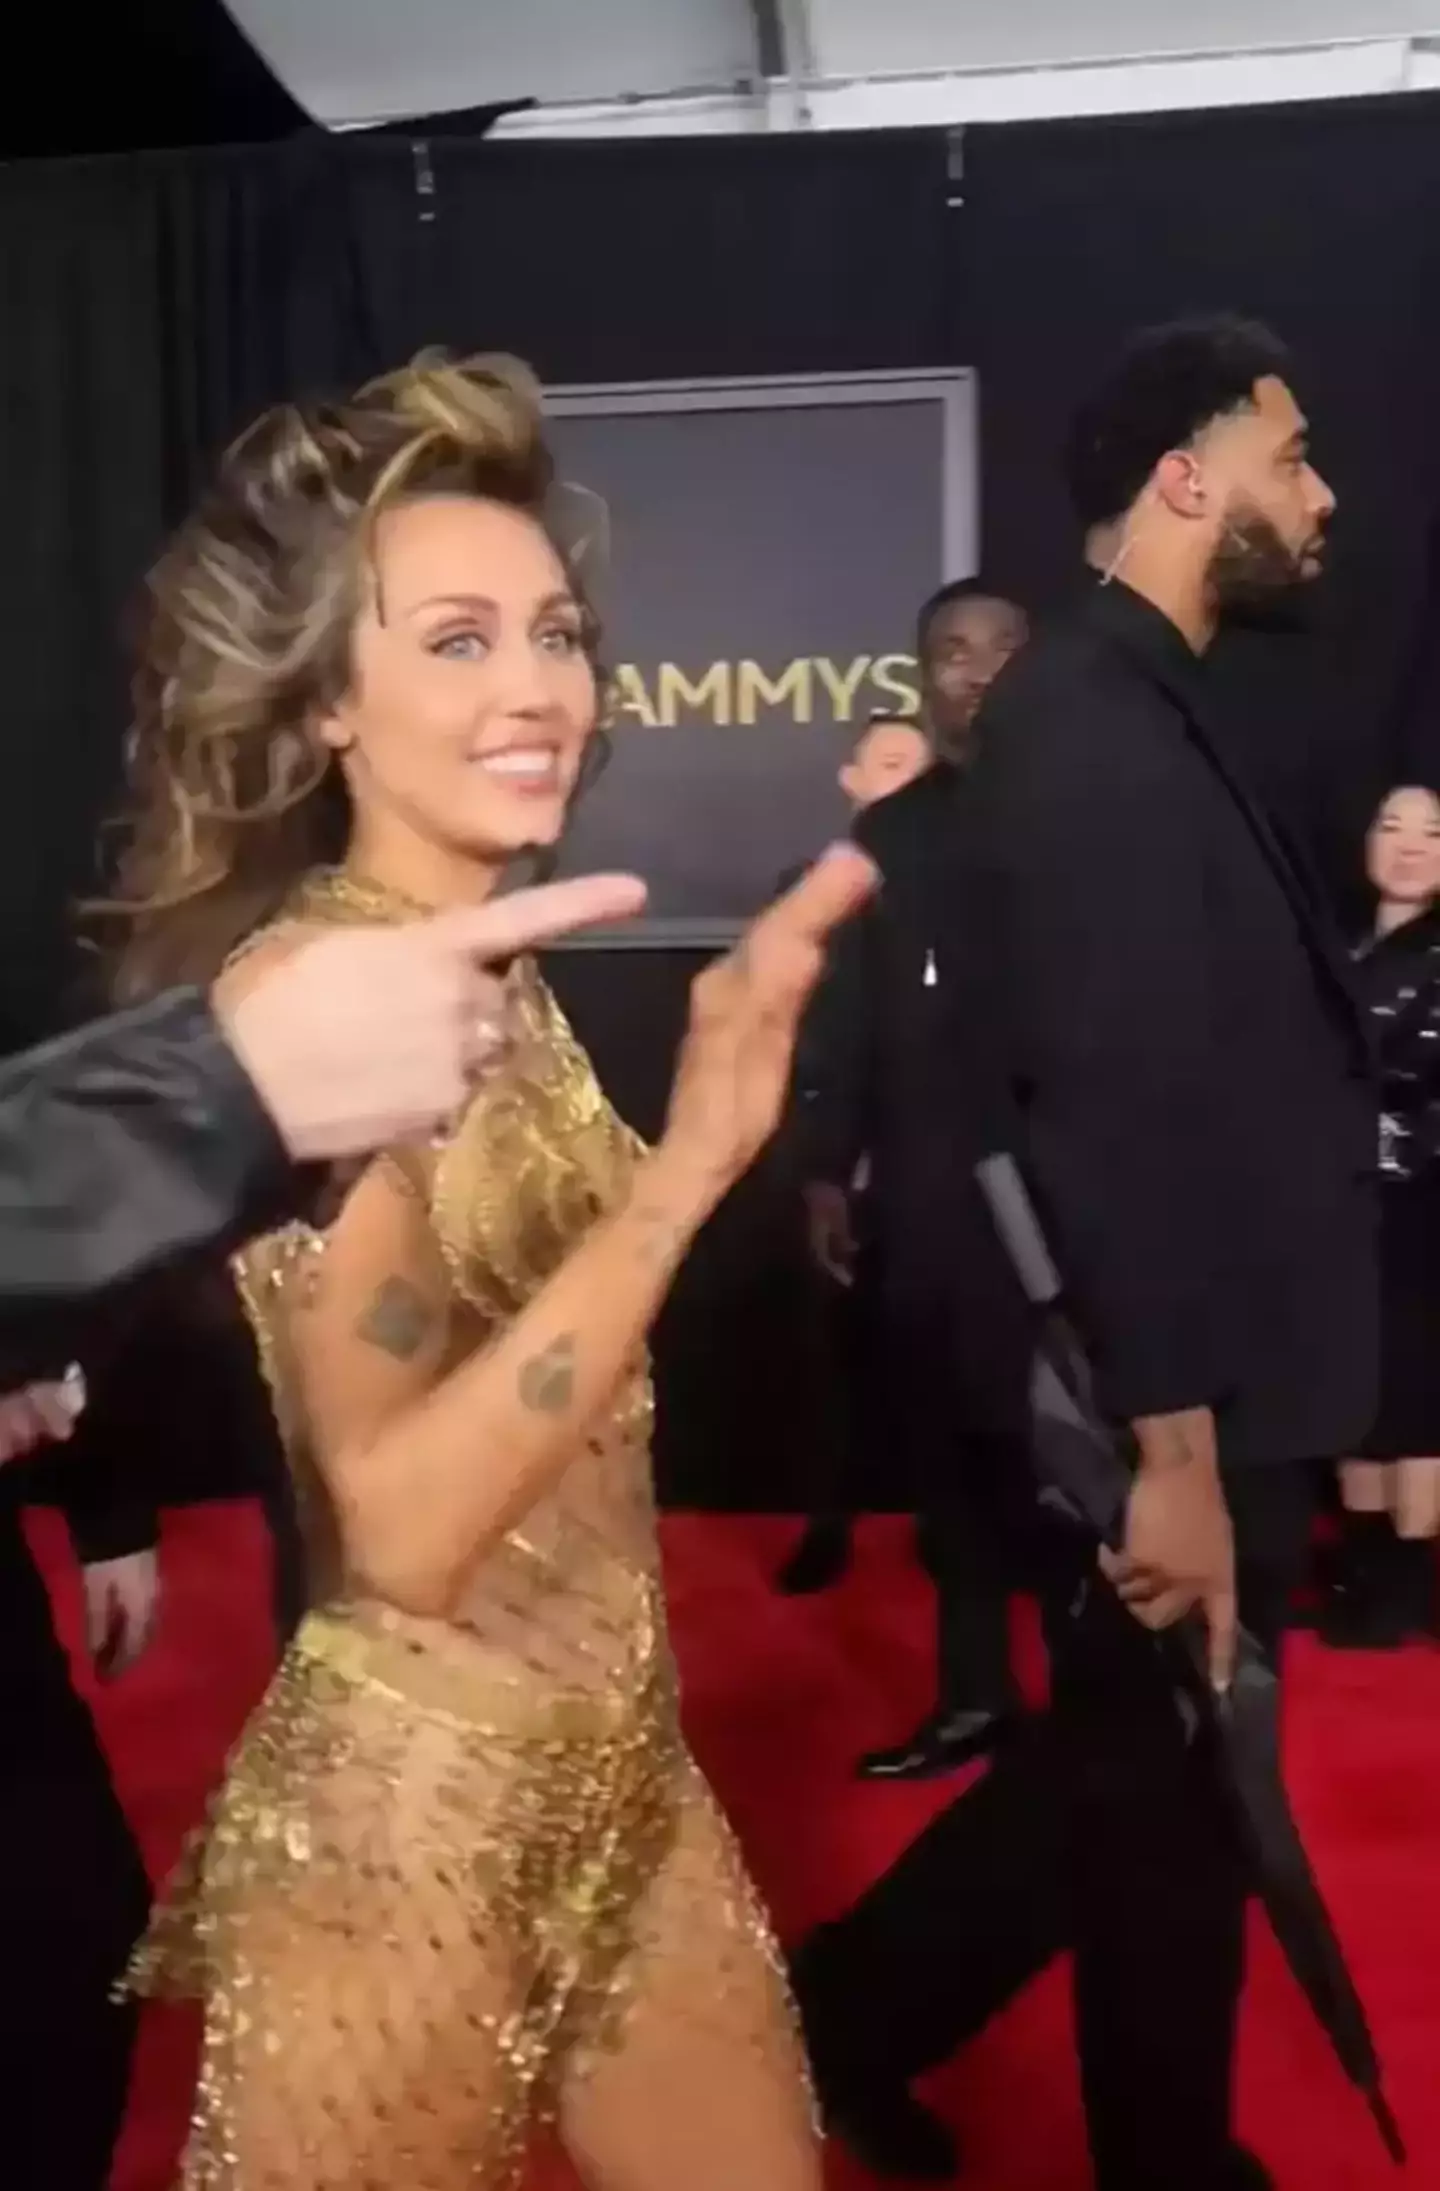 Fans speculated over what Miley Cyrus' bodyguard was holding at the Grammys.